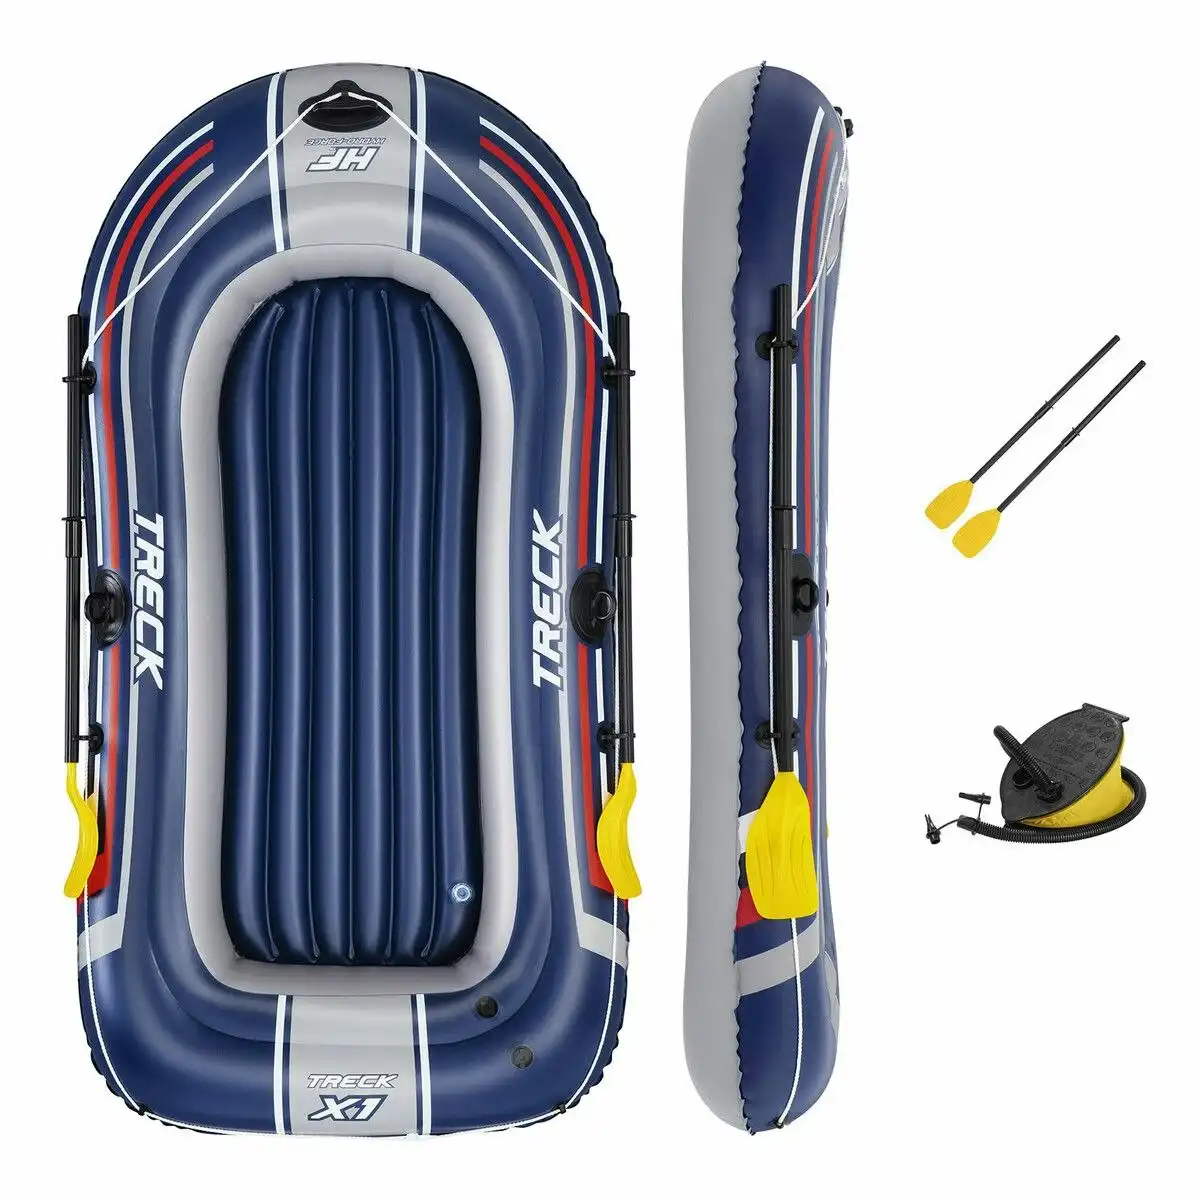 Bestway  Inflatable Boat Set 2.28m X 1.21m Floating Raft Blow Up Canoe Watercraft Vessel With Oars and Pump